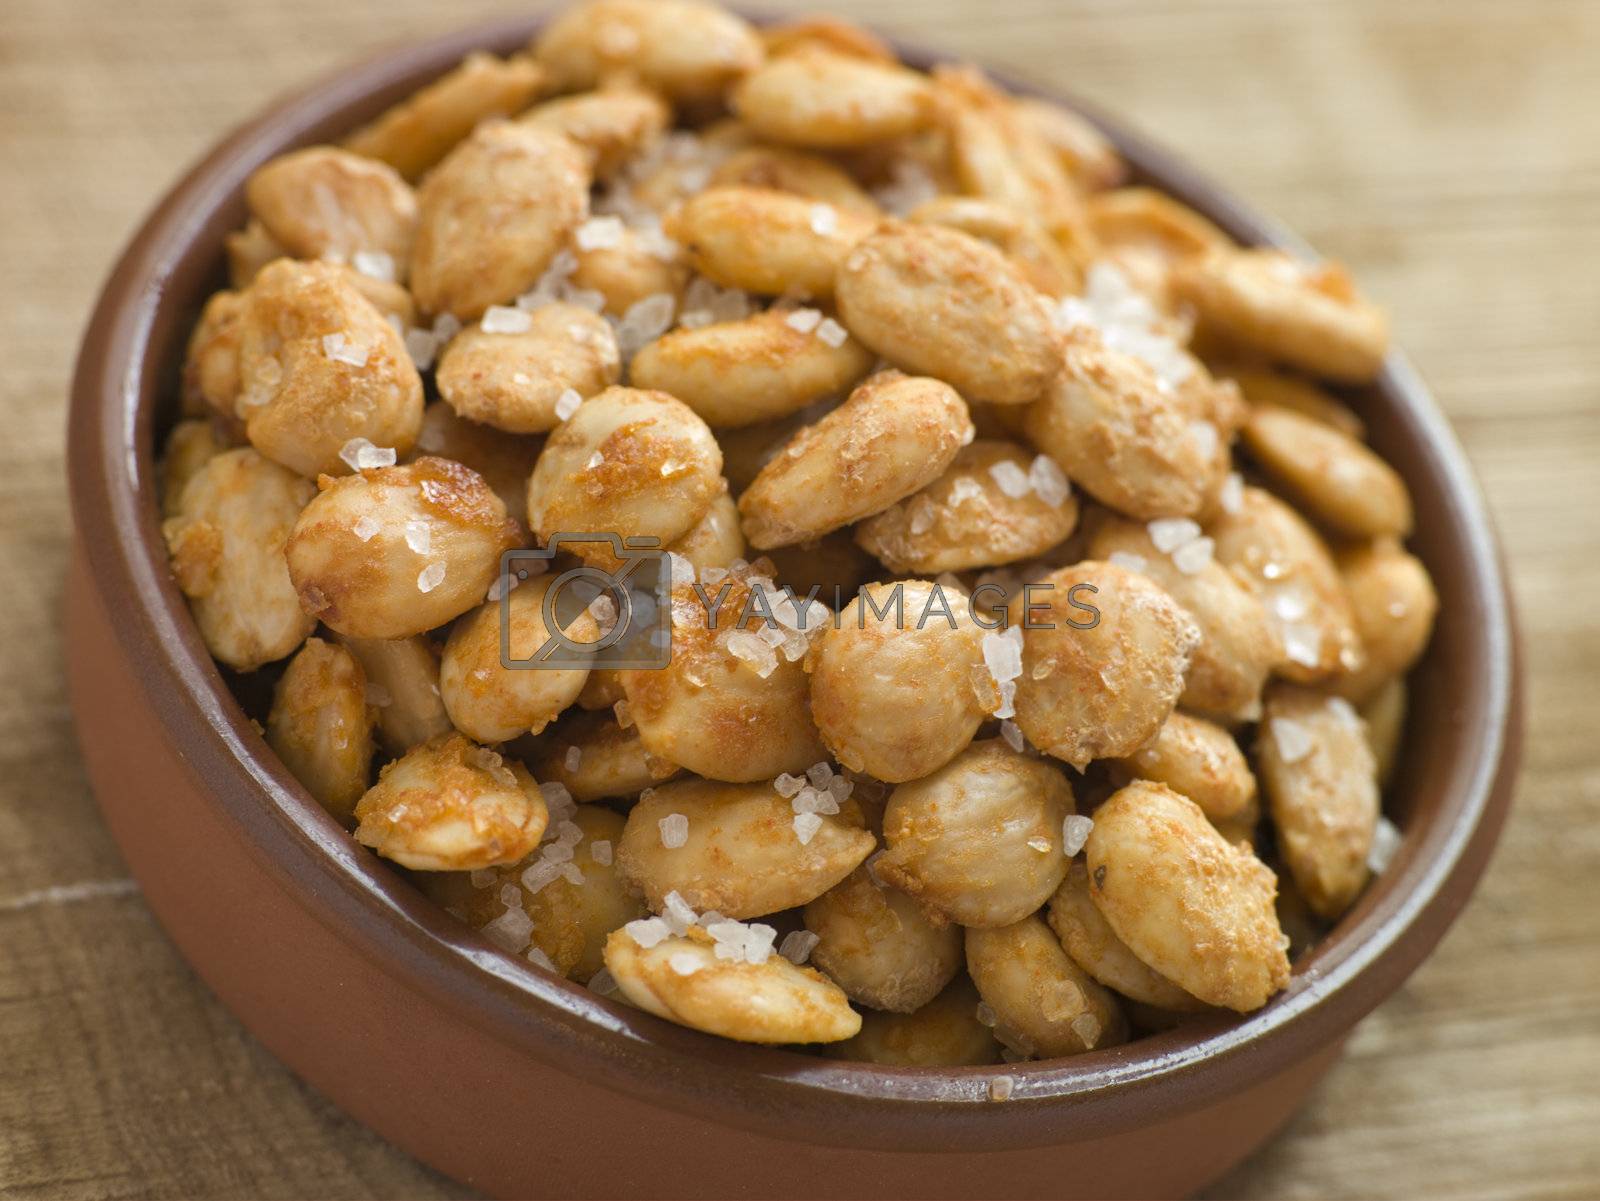 Royalty free image of Spiced and Salted Macadamia Nuts by MonkeyBusiness